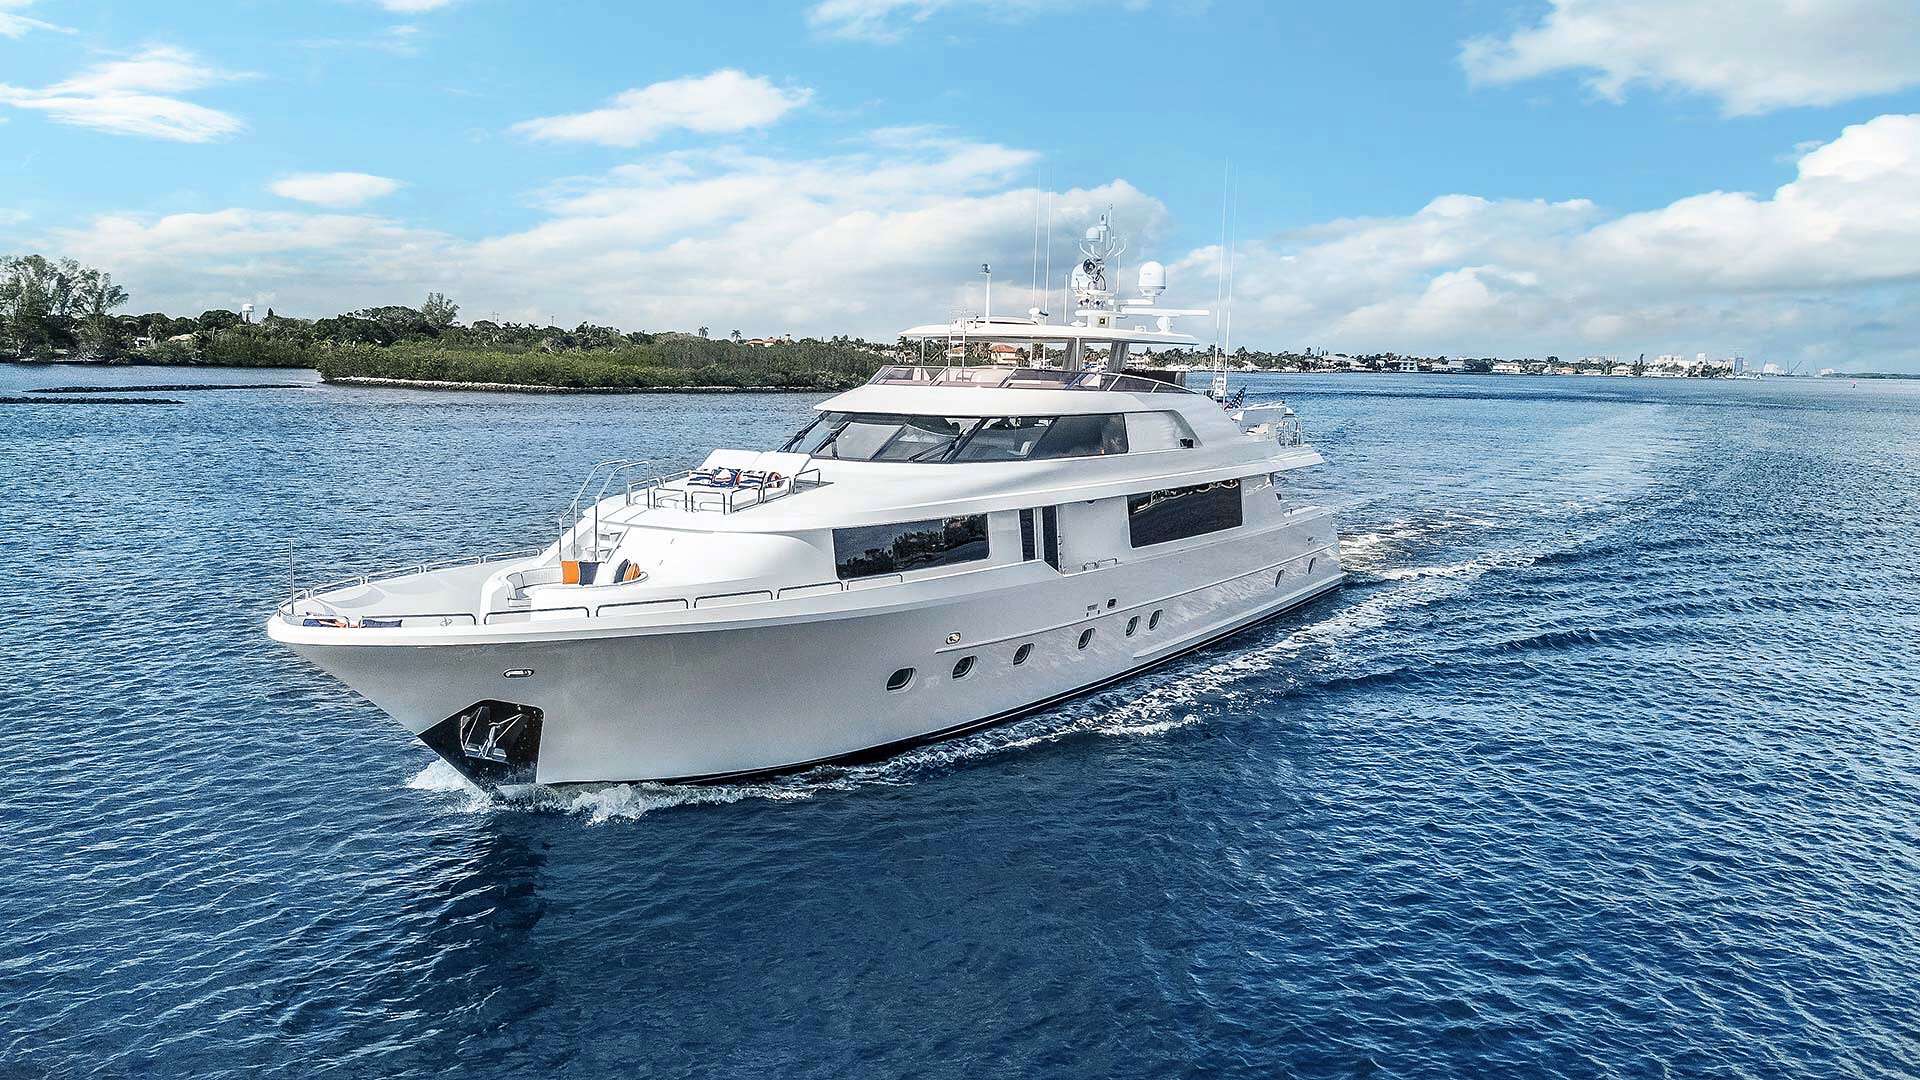 LUCKY LADY - Yacht Charter Newport & Boat hire in US East Coast & Bahamas 1